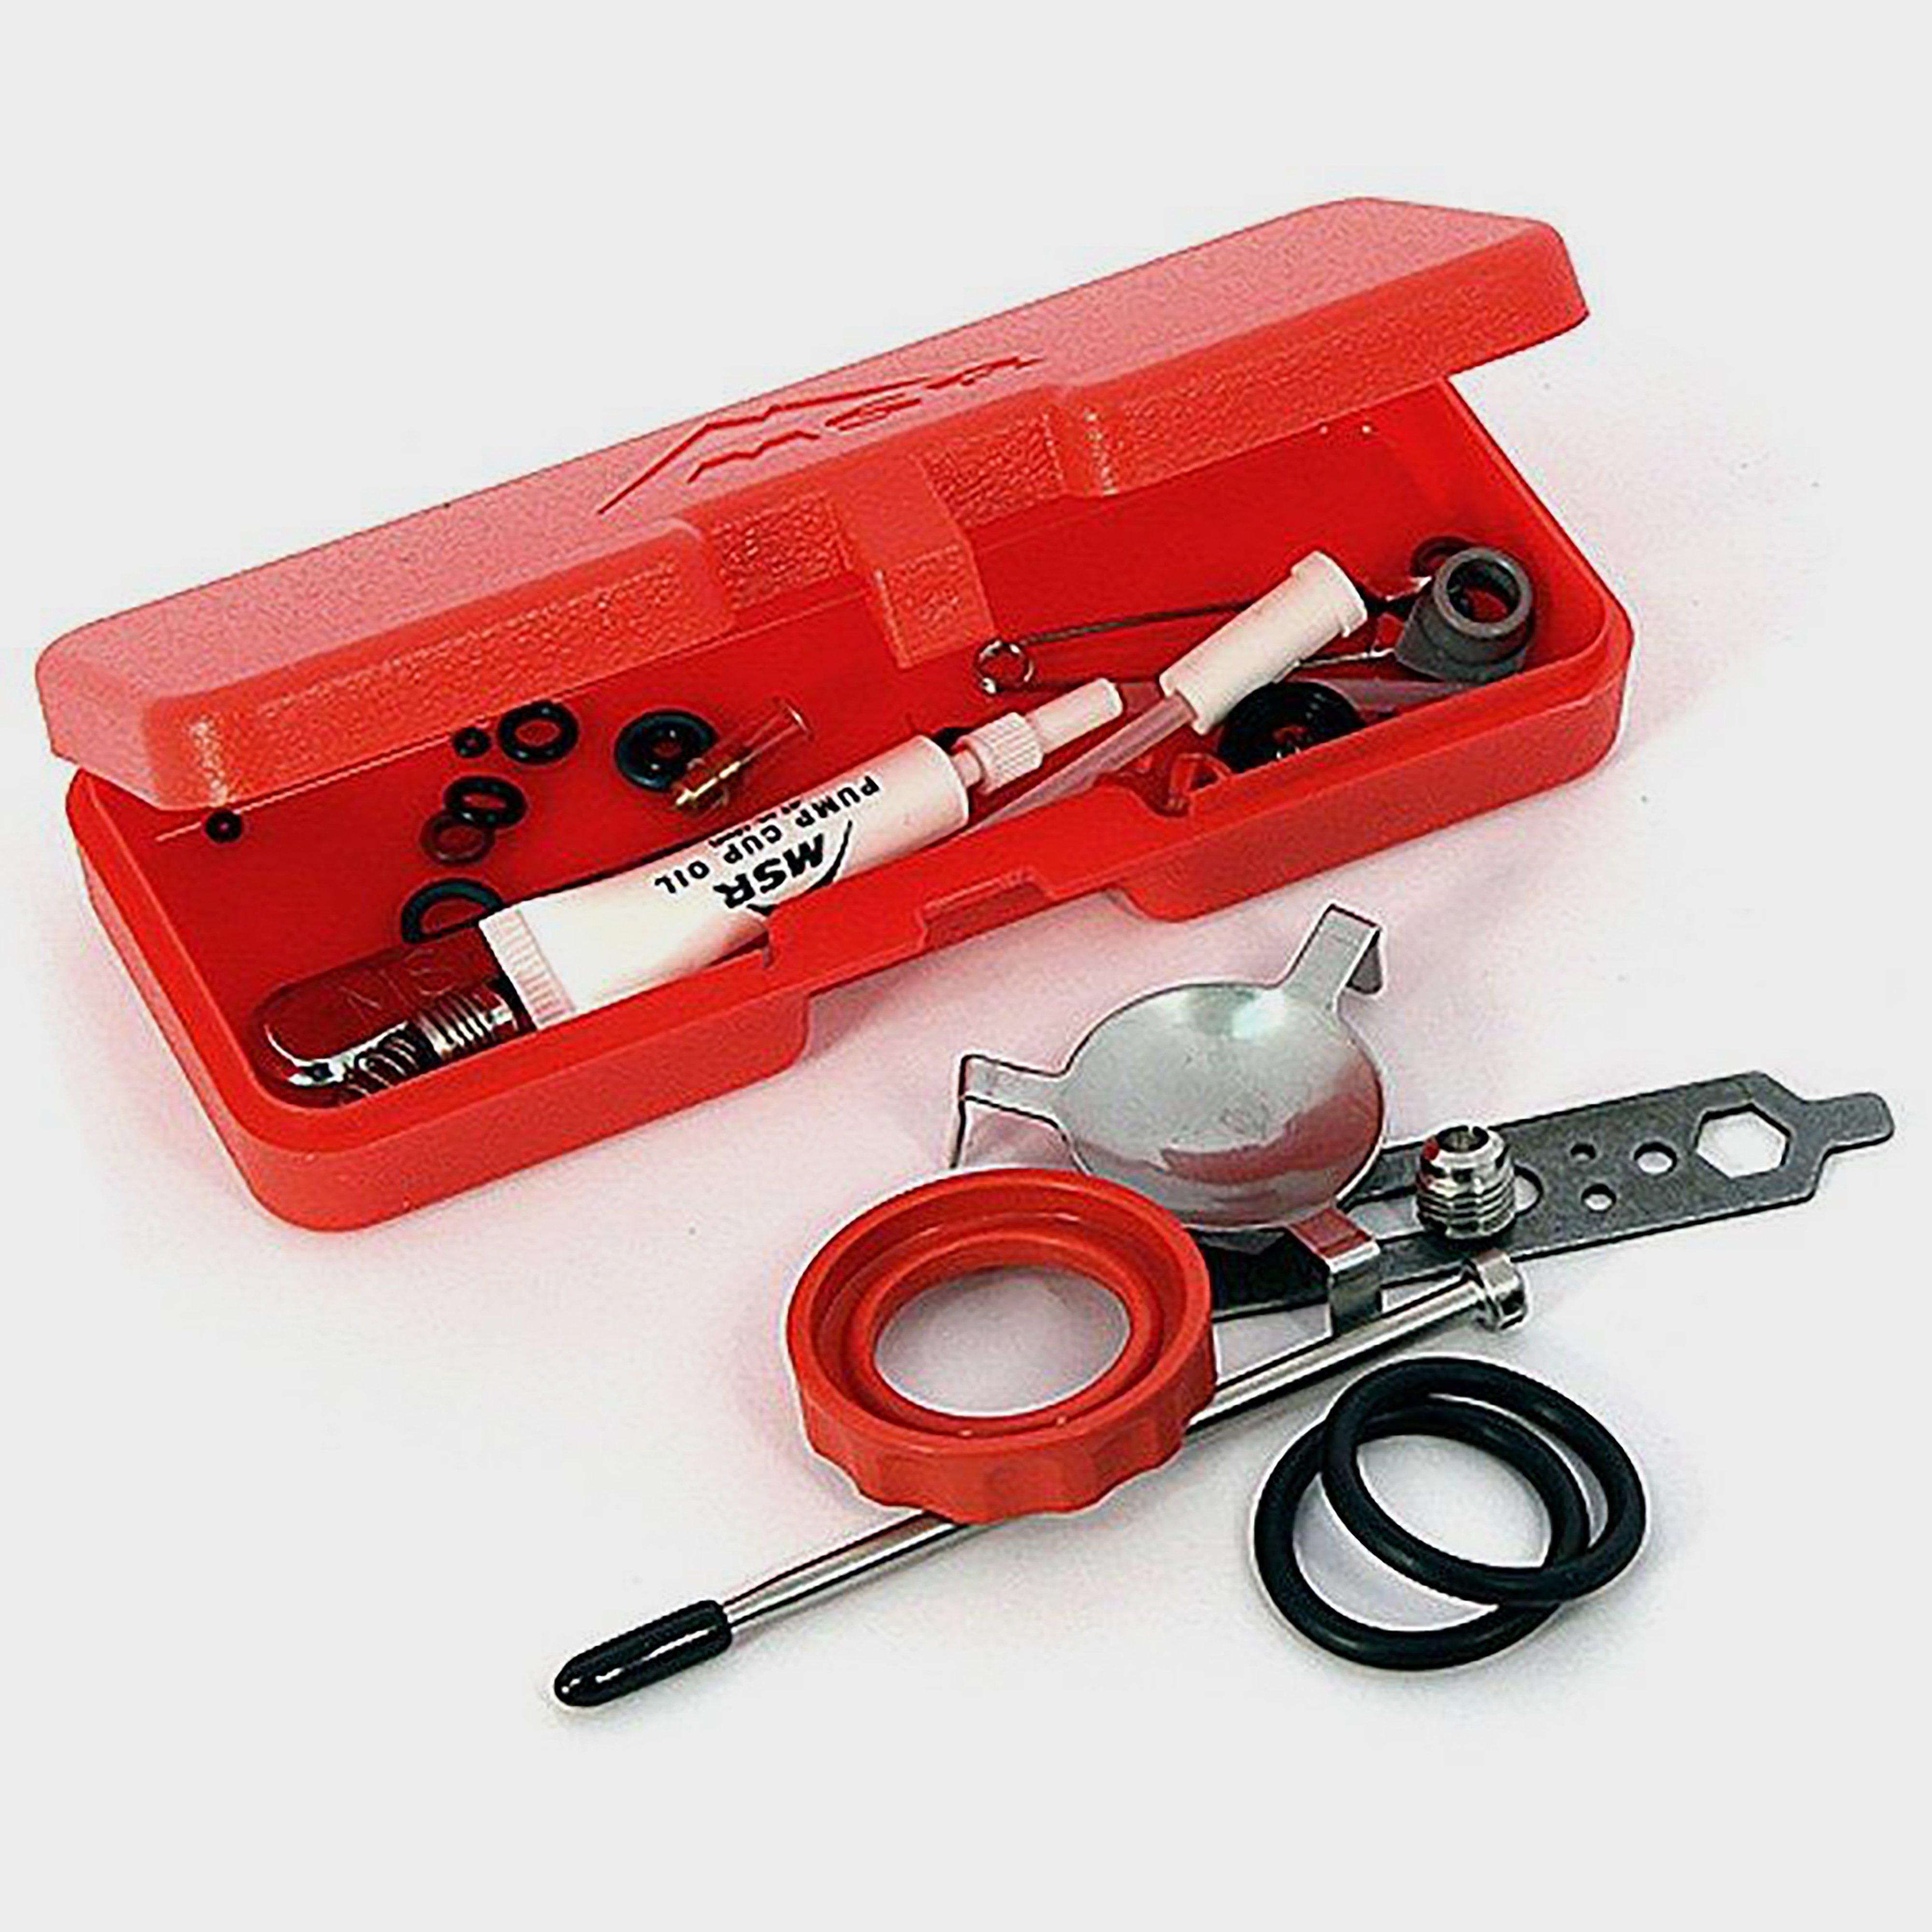  MSR Exped Service Kit for Dragonfly Stove, Red